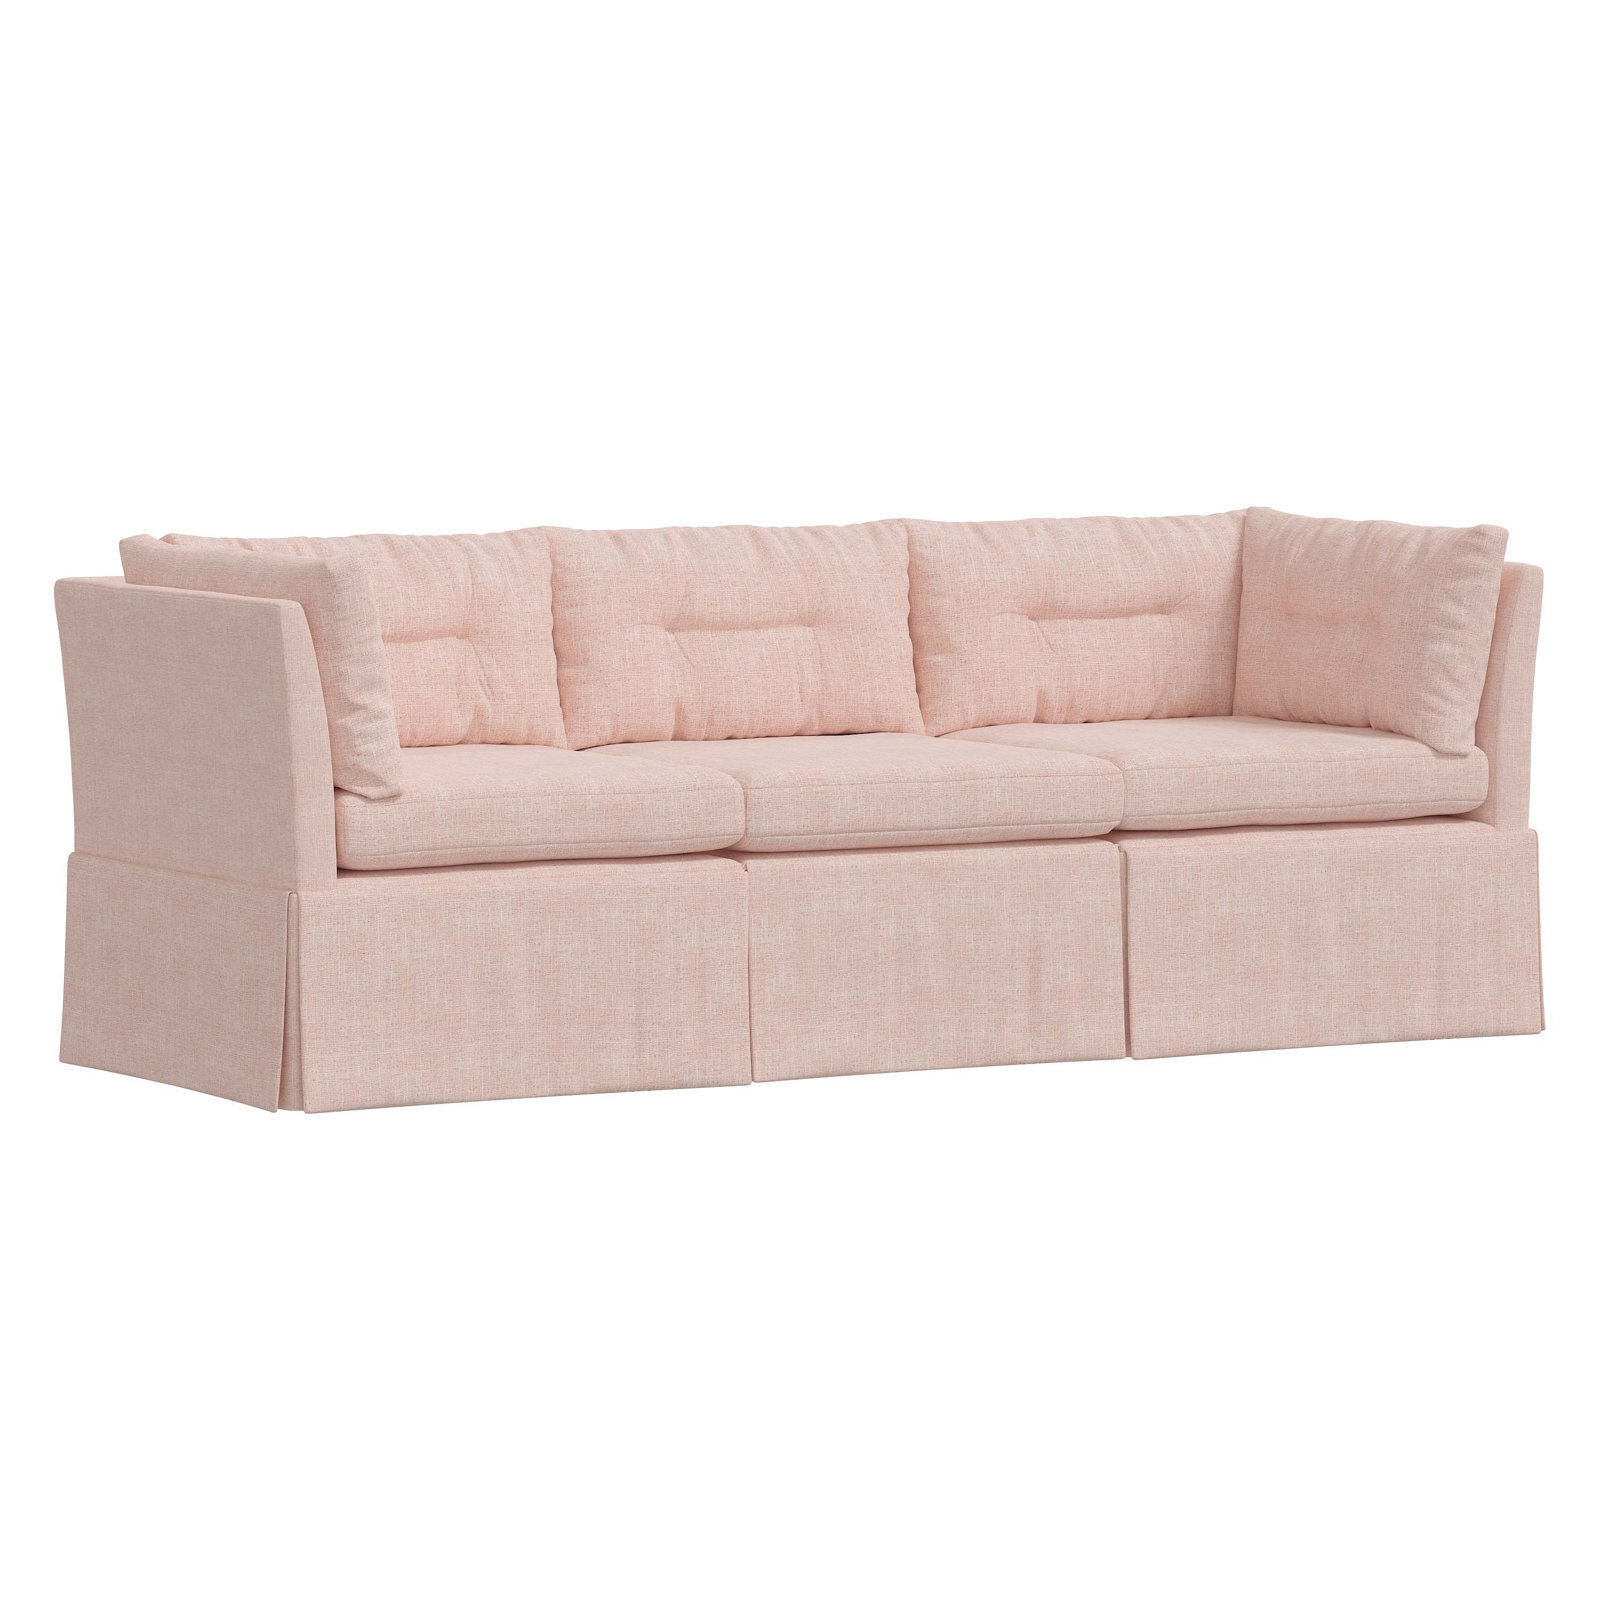 Long pink tufted couch